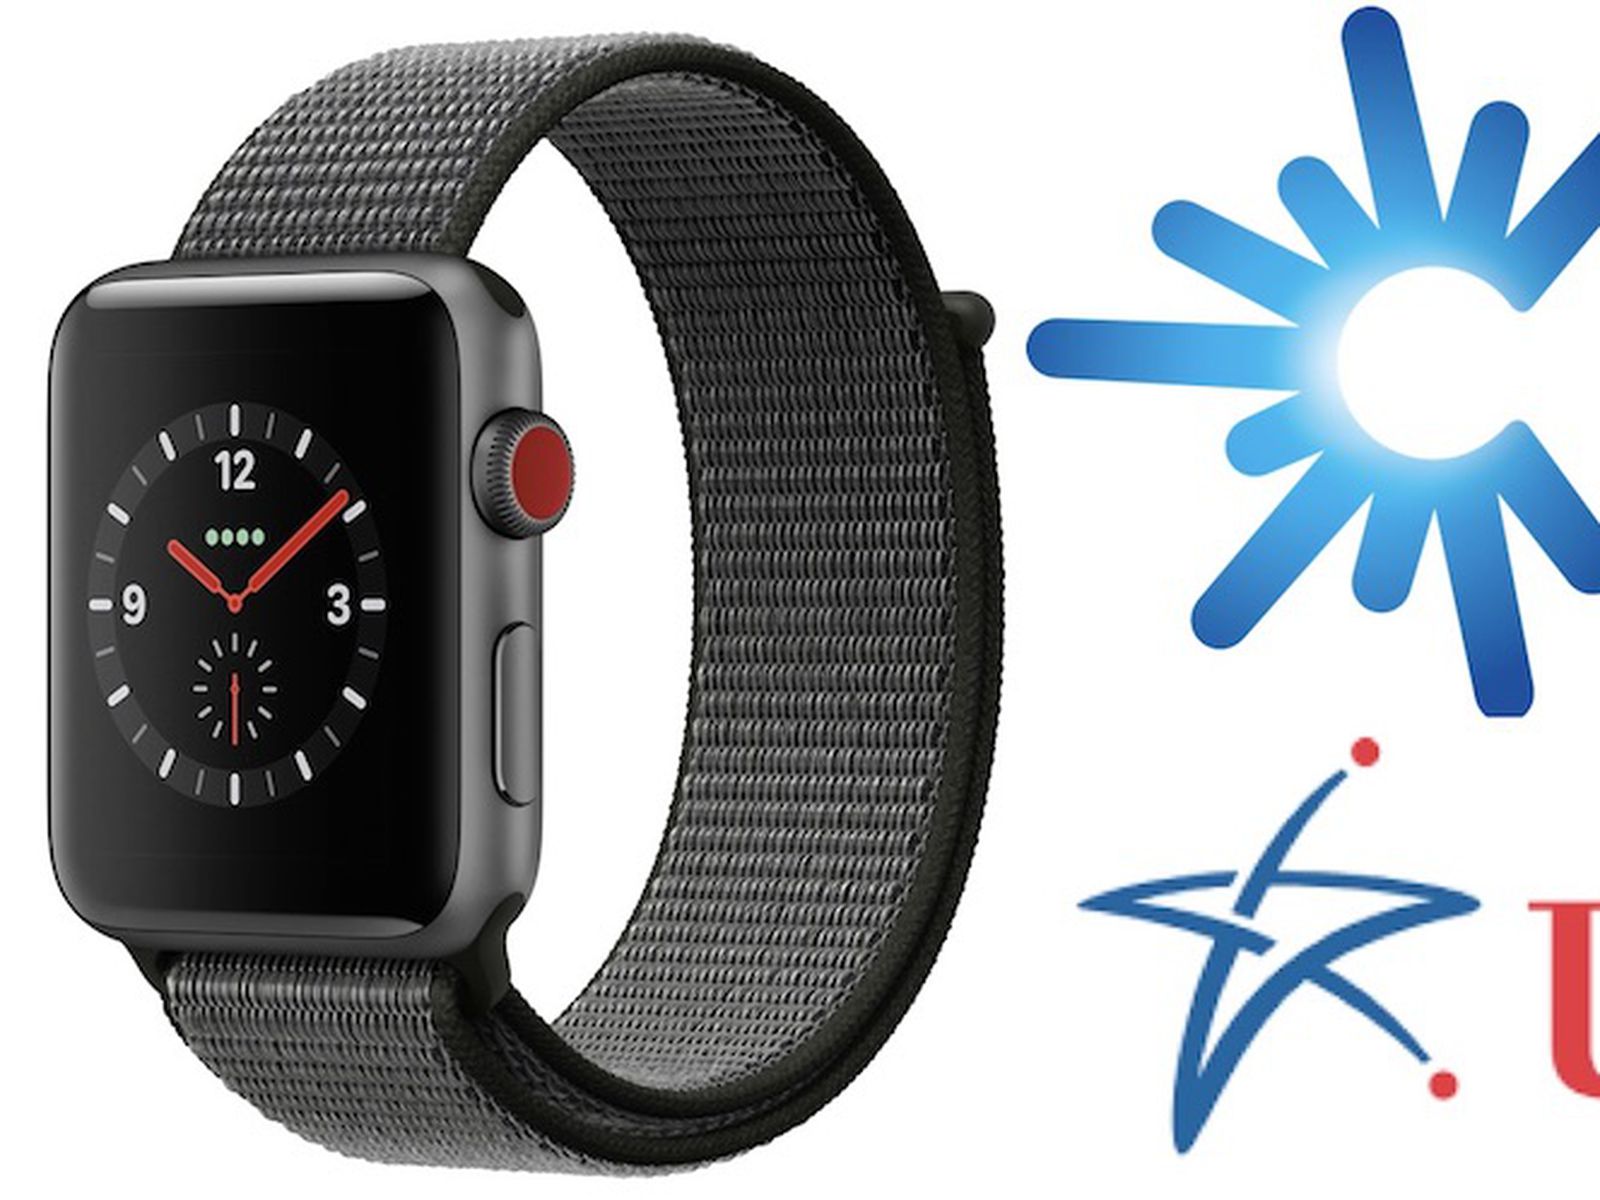 Apple Watch Series 3 Lte Now Supported By Regional Carriers C Spire And Us Cellular Macrumors